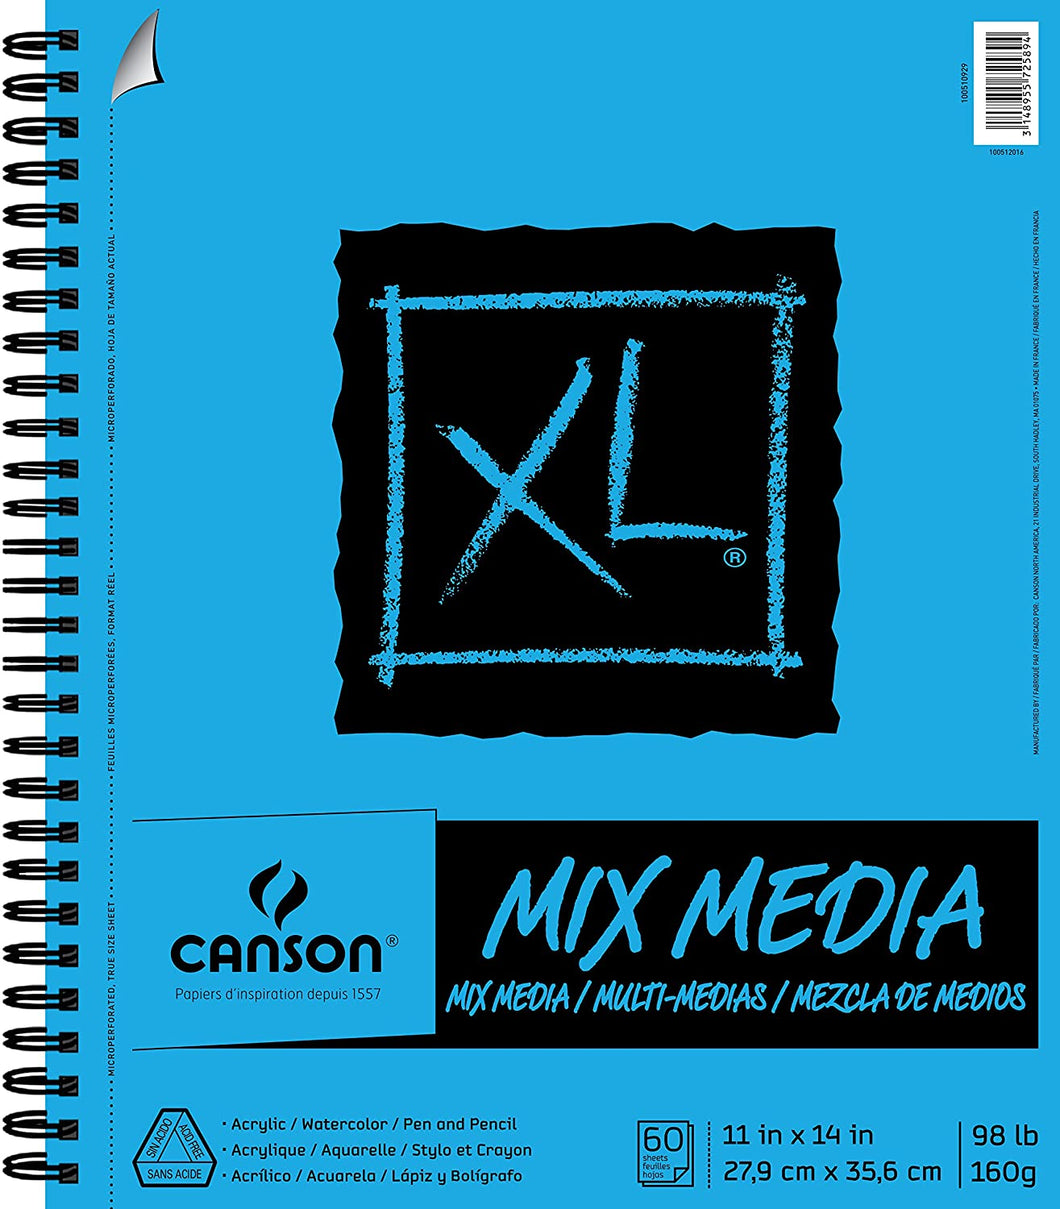 Canson - XL Mix Media Pads, 11